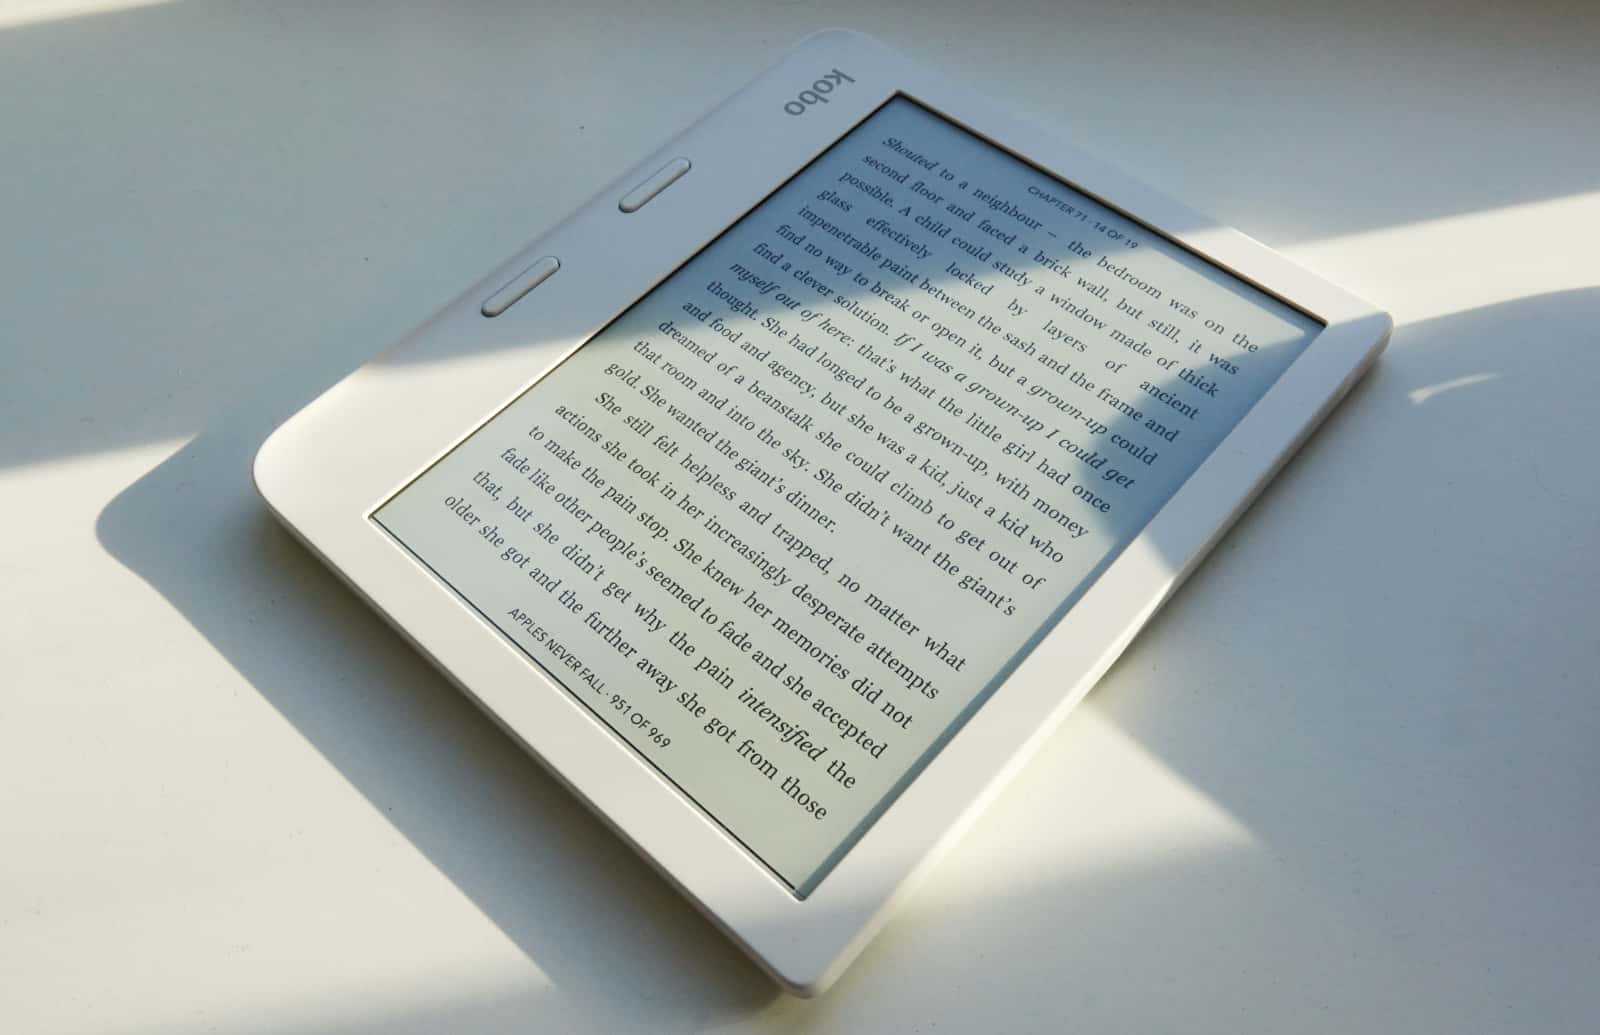 Kobo Libra 2 Review: Not Perfect, but an Excellent Kindle Alternative